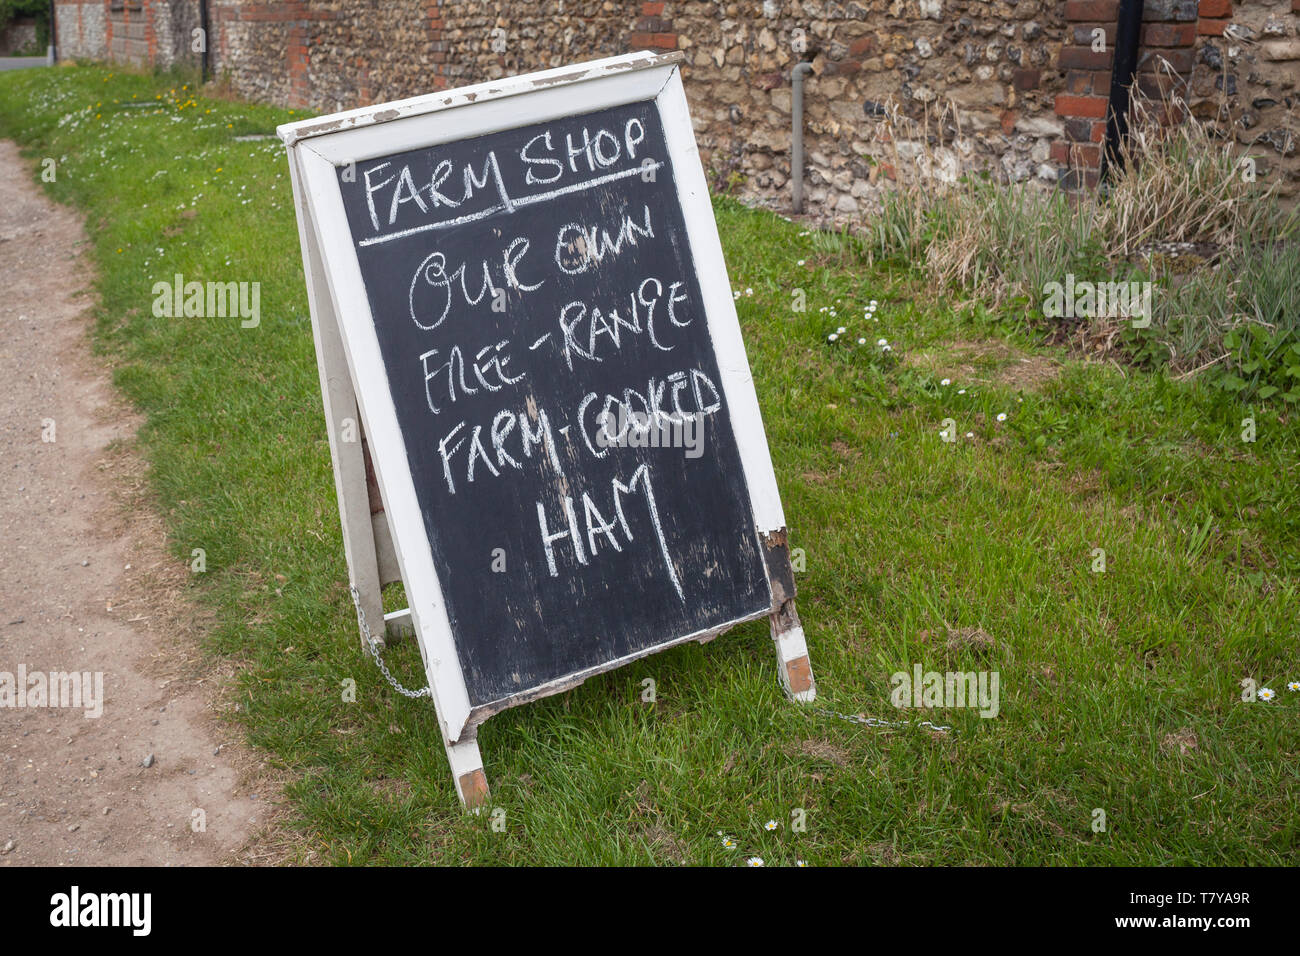 Hand-written sign for Farm Shop selling free-range farm-cooked ham in the village of Britwell Salome, Oxfordshire. Stock Photo